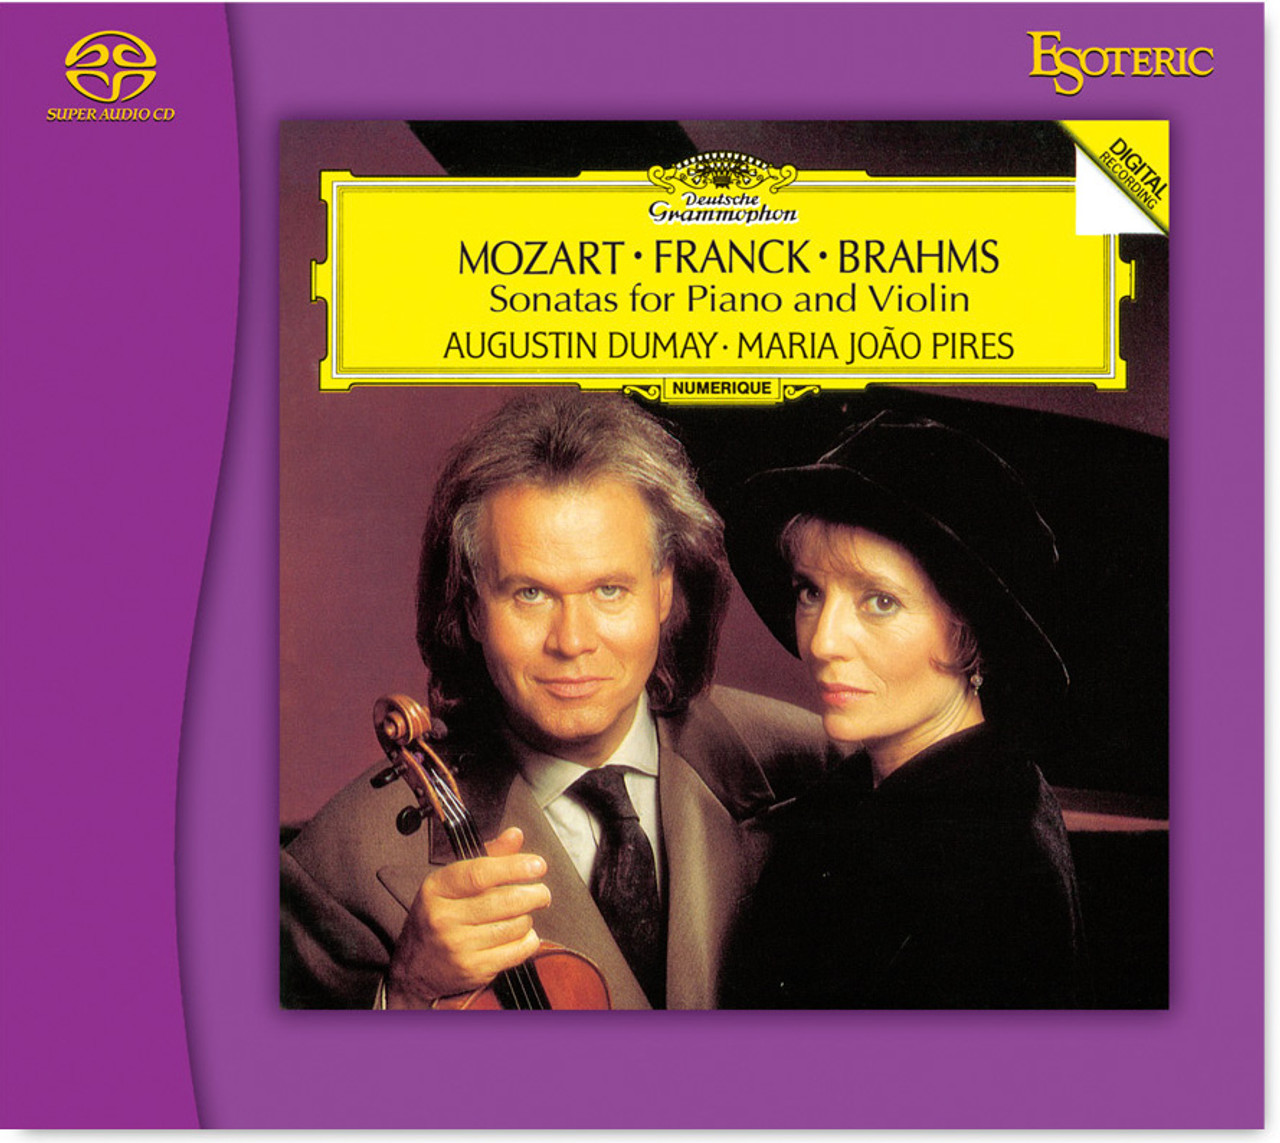 Brahms:　SACD　César　Piano　Franck,　Mozart,　Pires　Wolfgang　Dumay,　Limited,　Hybrid,　Maria　ESSG-90219,　4907034222926,　Joäo　For　And　Amadeus　EAN　Johannes　Limited,　Sonatas　ESOTERIC　Remastered,　Classical　Augustin　Violin,　Remastered